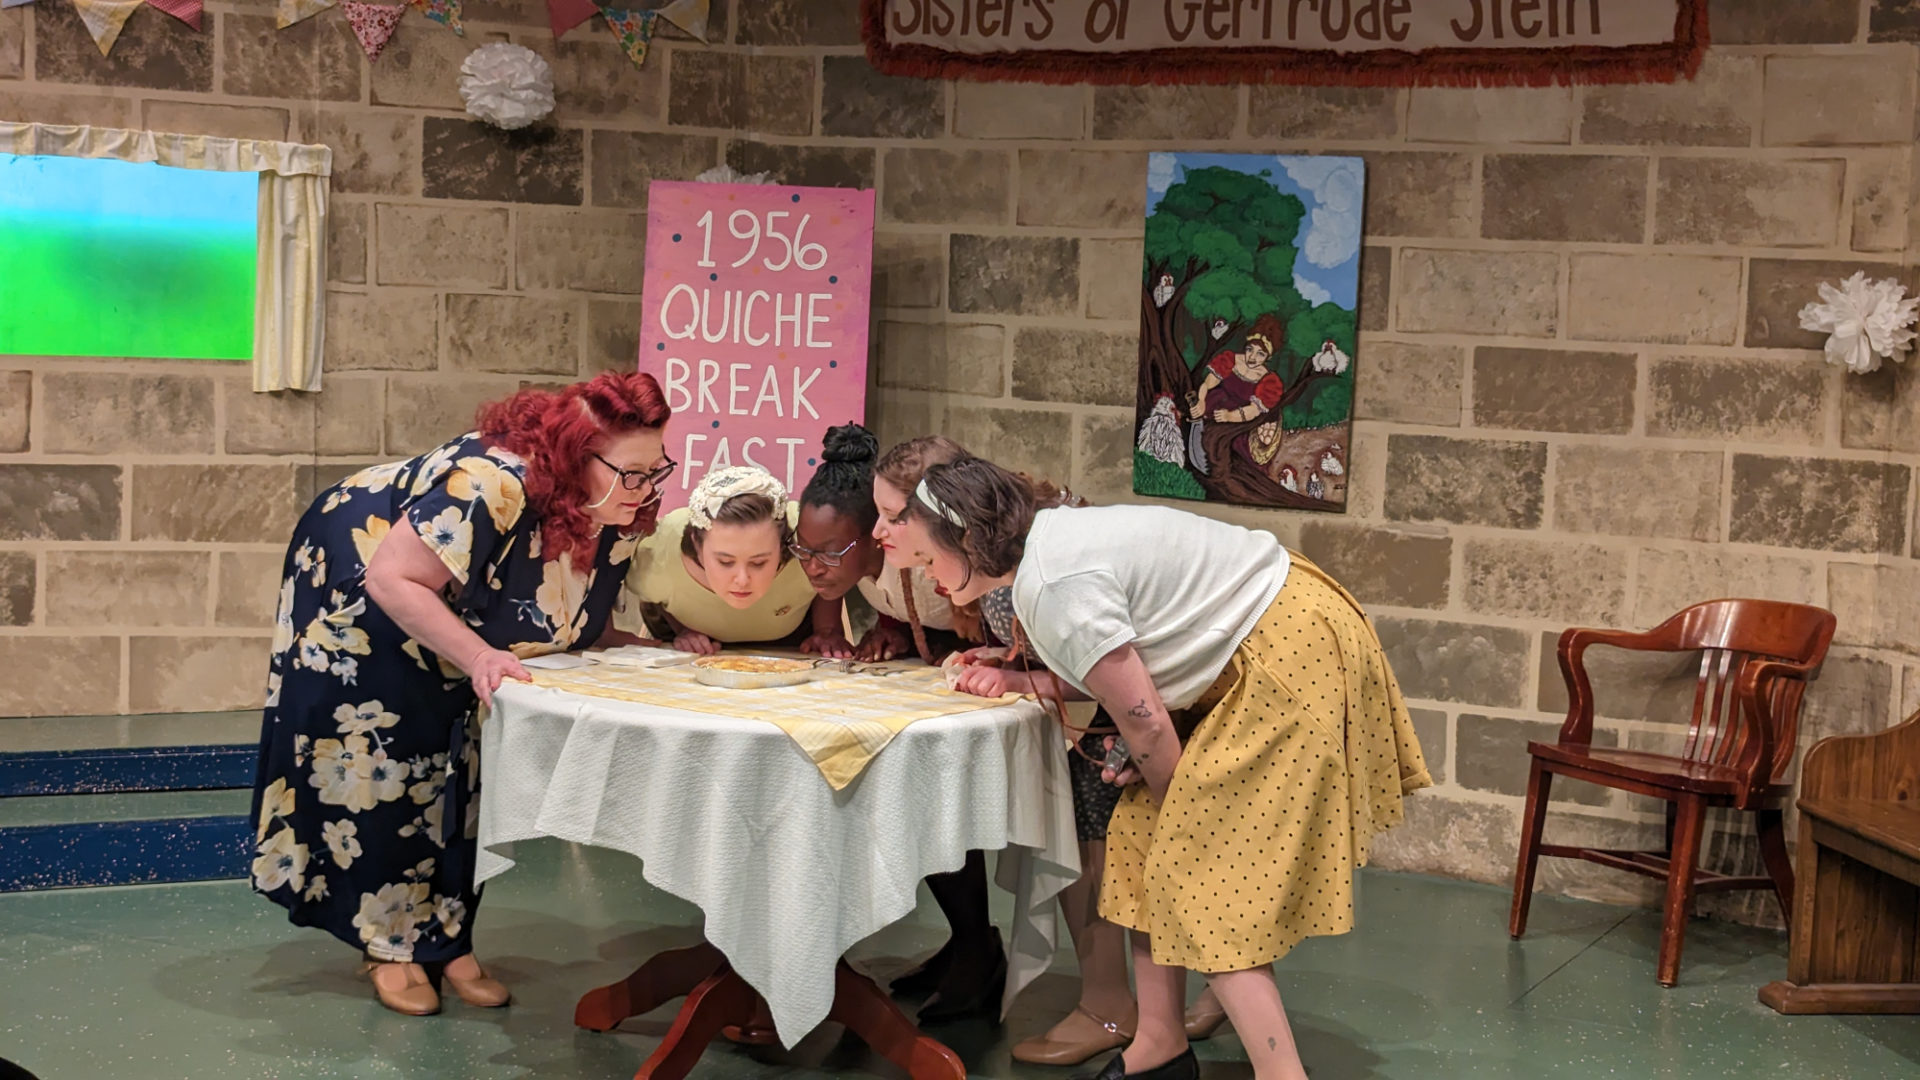 5 Lesbians Eating a Quiche is a fun and funny romp